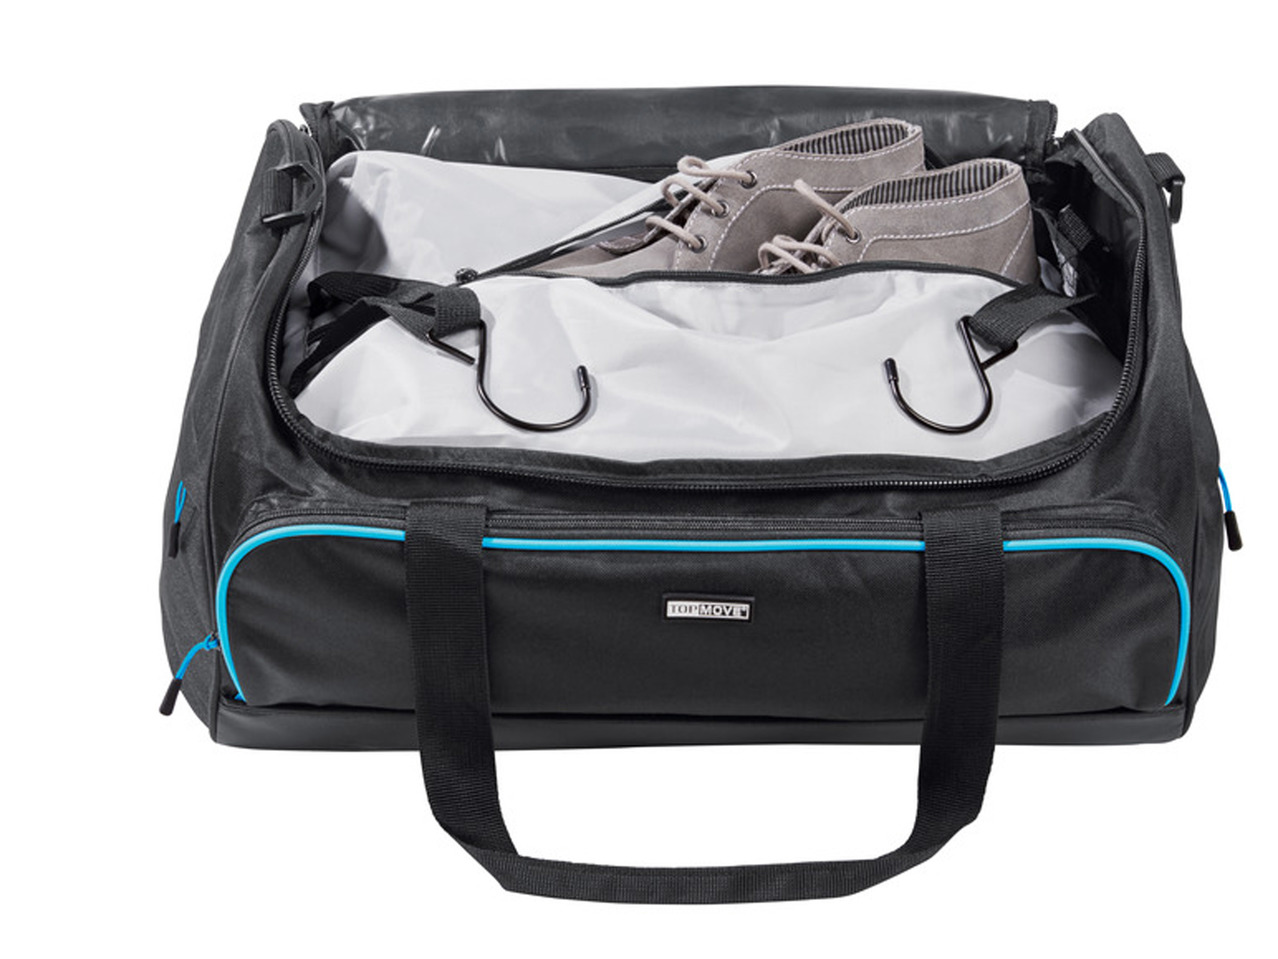 43L Travel Bag with Build in Organiser